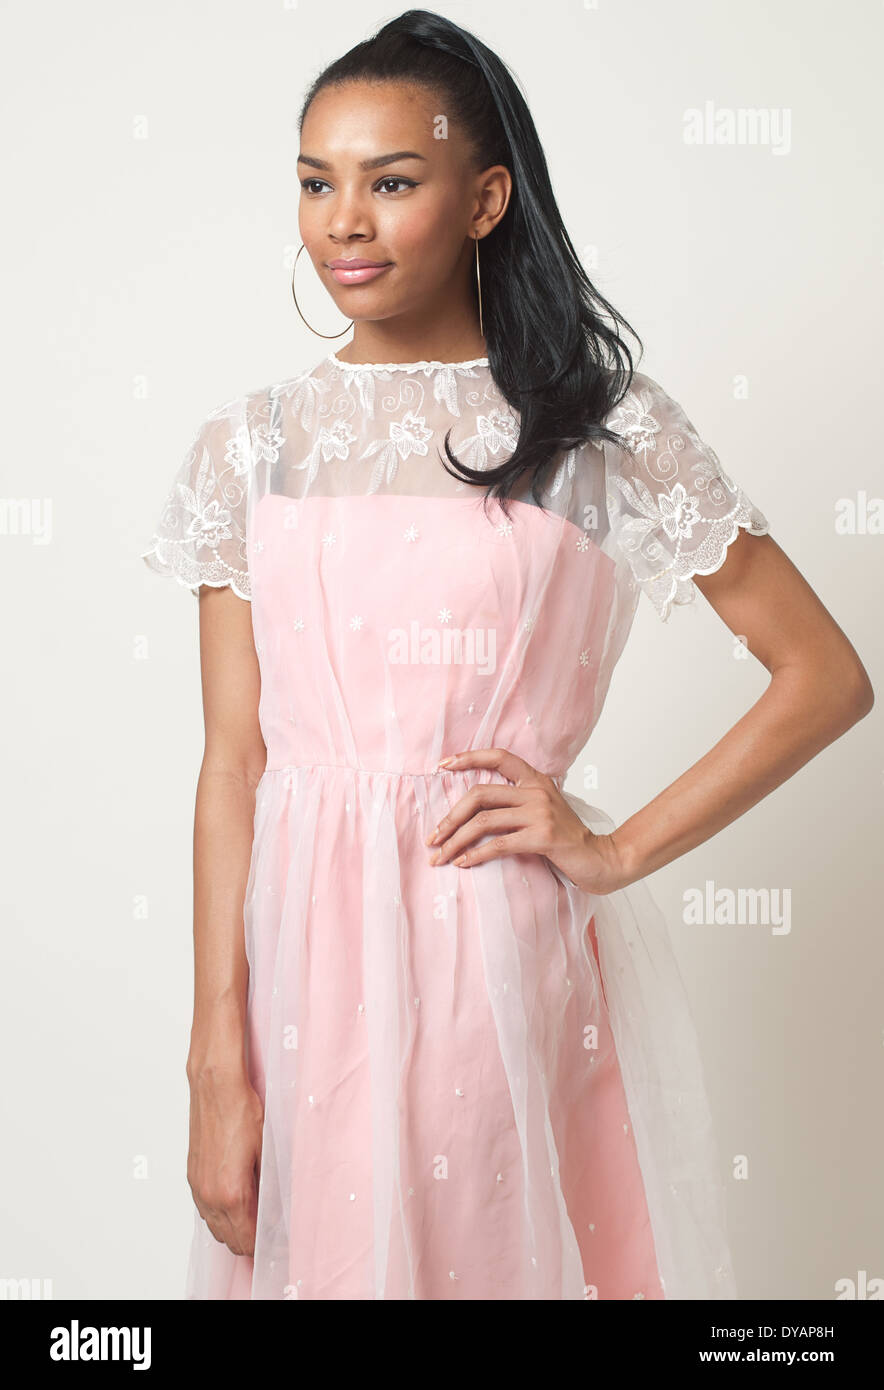 A black hair woman with ponytail, African American female model wearing a 50s pastel pink lace formal dress posing Stock Photo